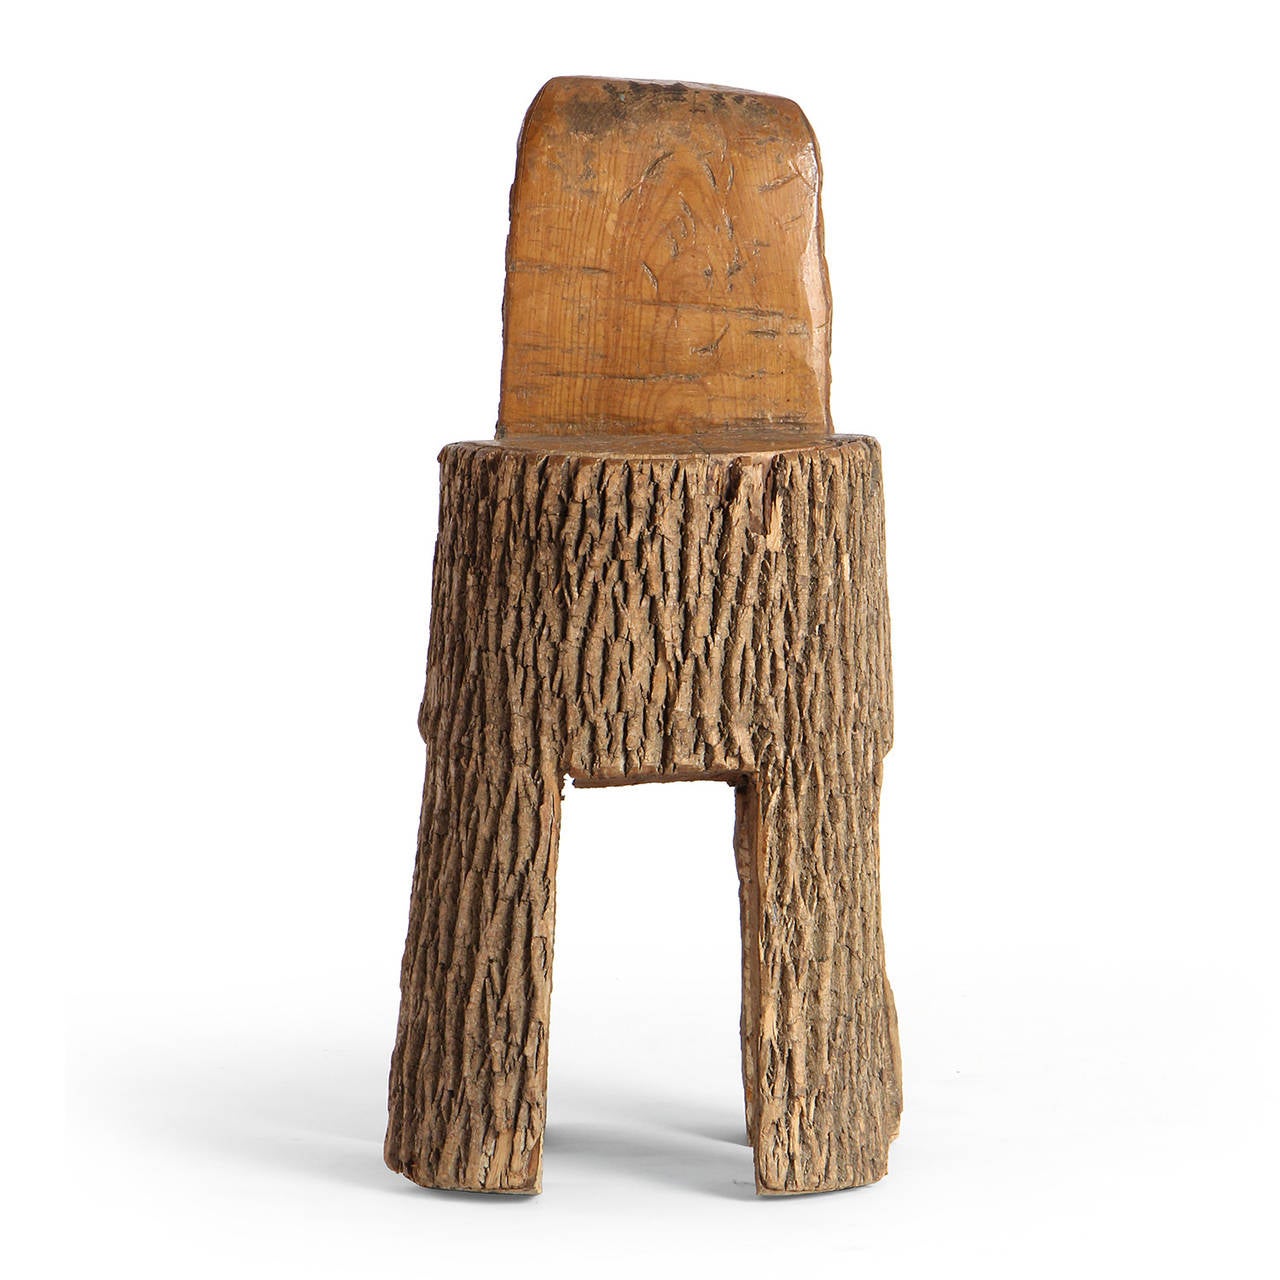 A well scaled and stout chair or stool masterfully hewed and carved from a singular mature oak tree trunk.